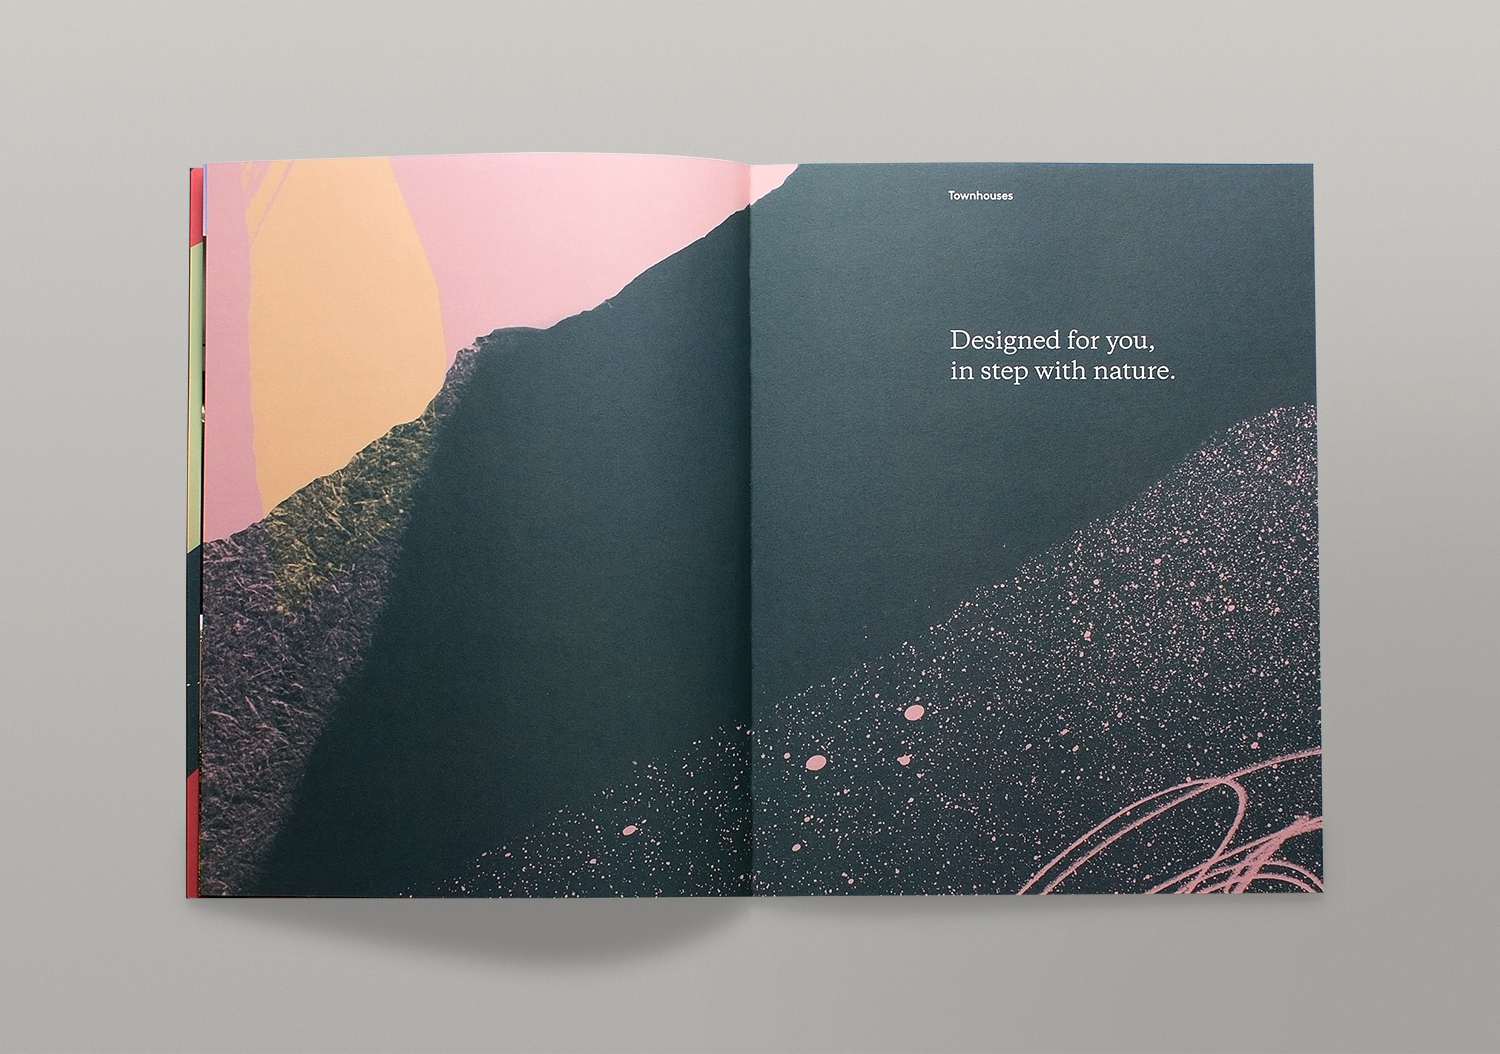 Visual identity and brochure design for Everlea by Studio Brave featuring illustration by Tom Abbiss Smith